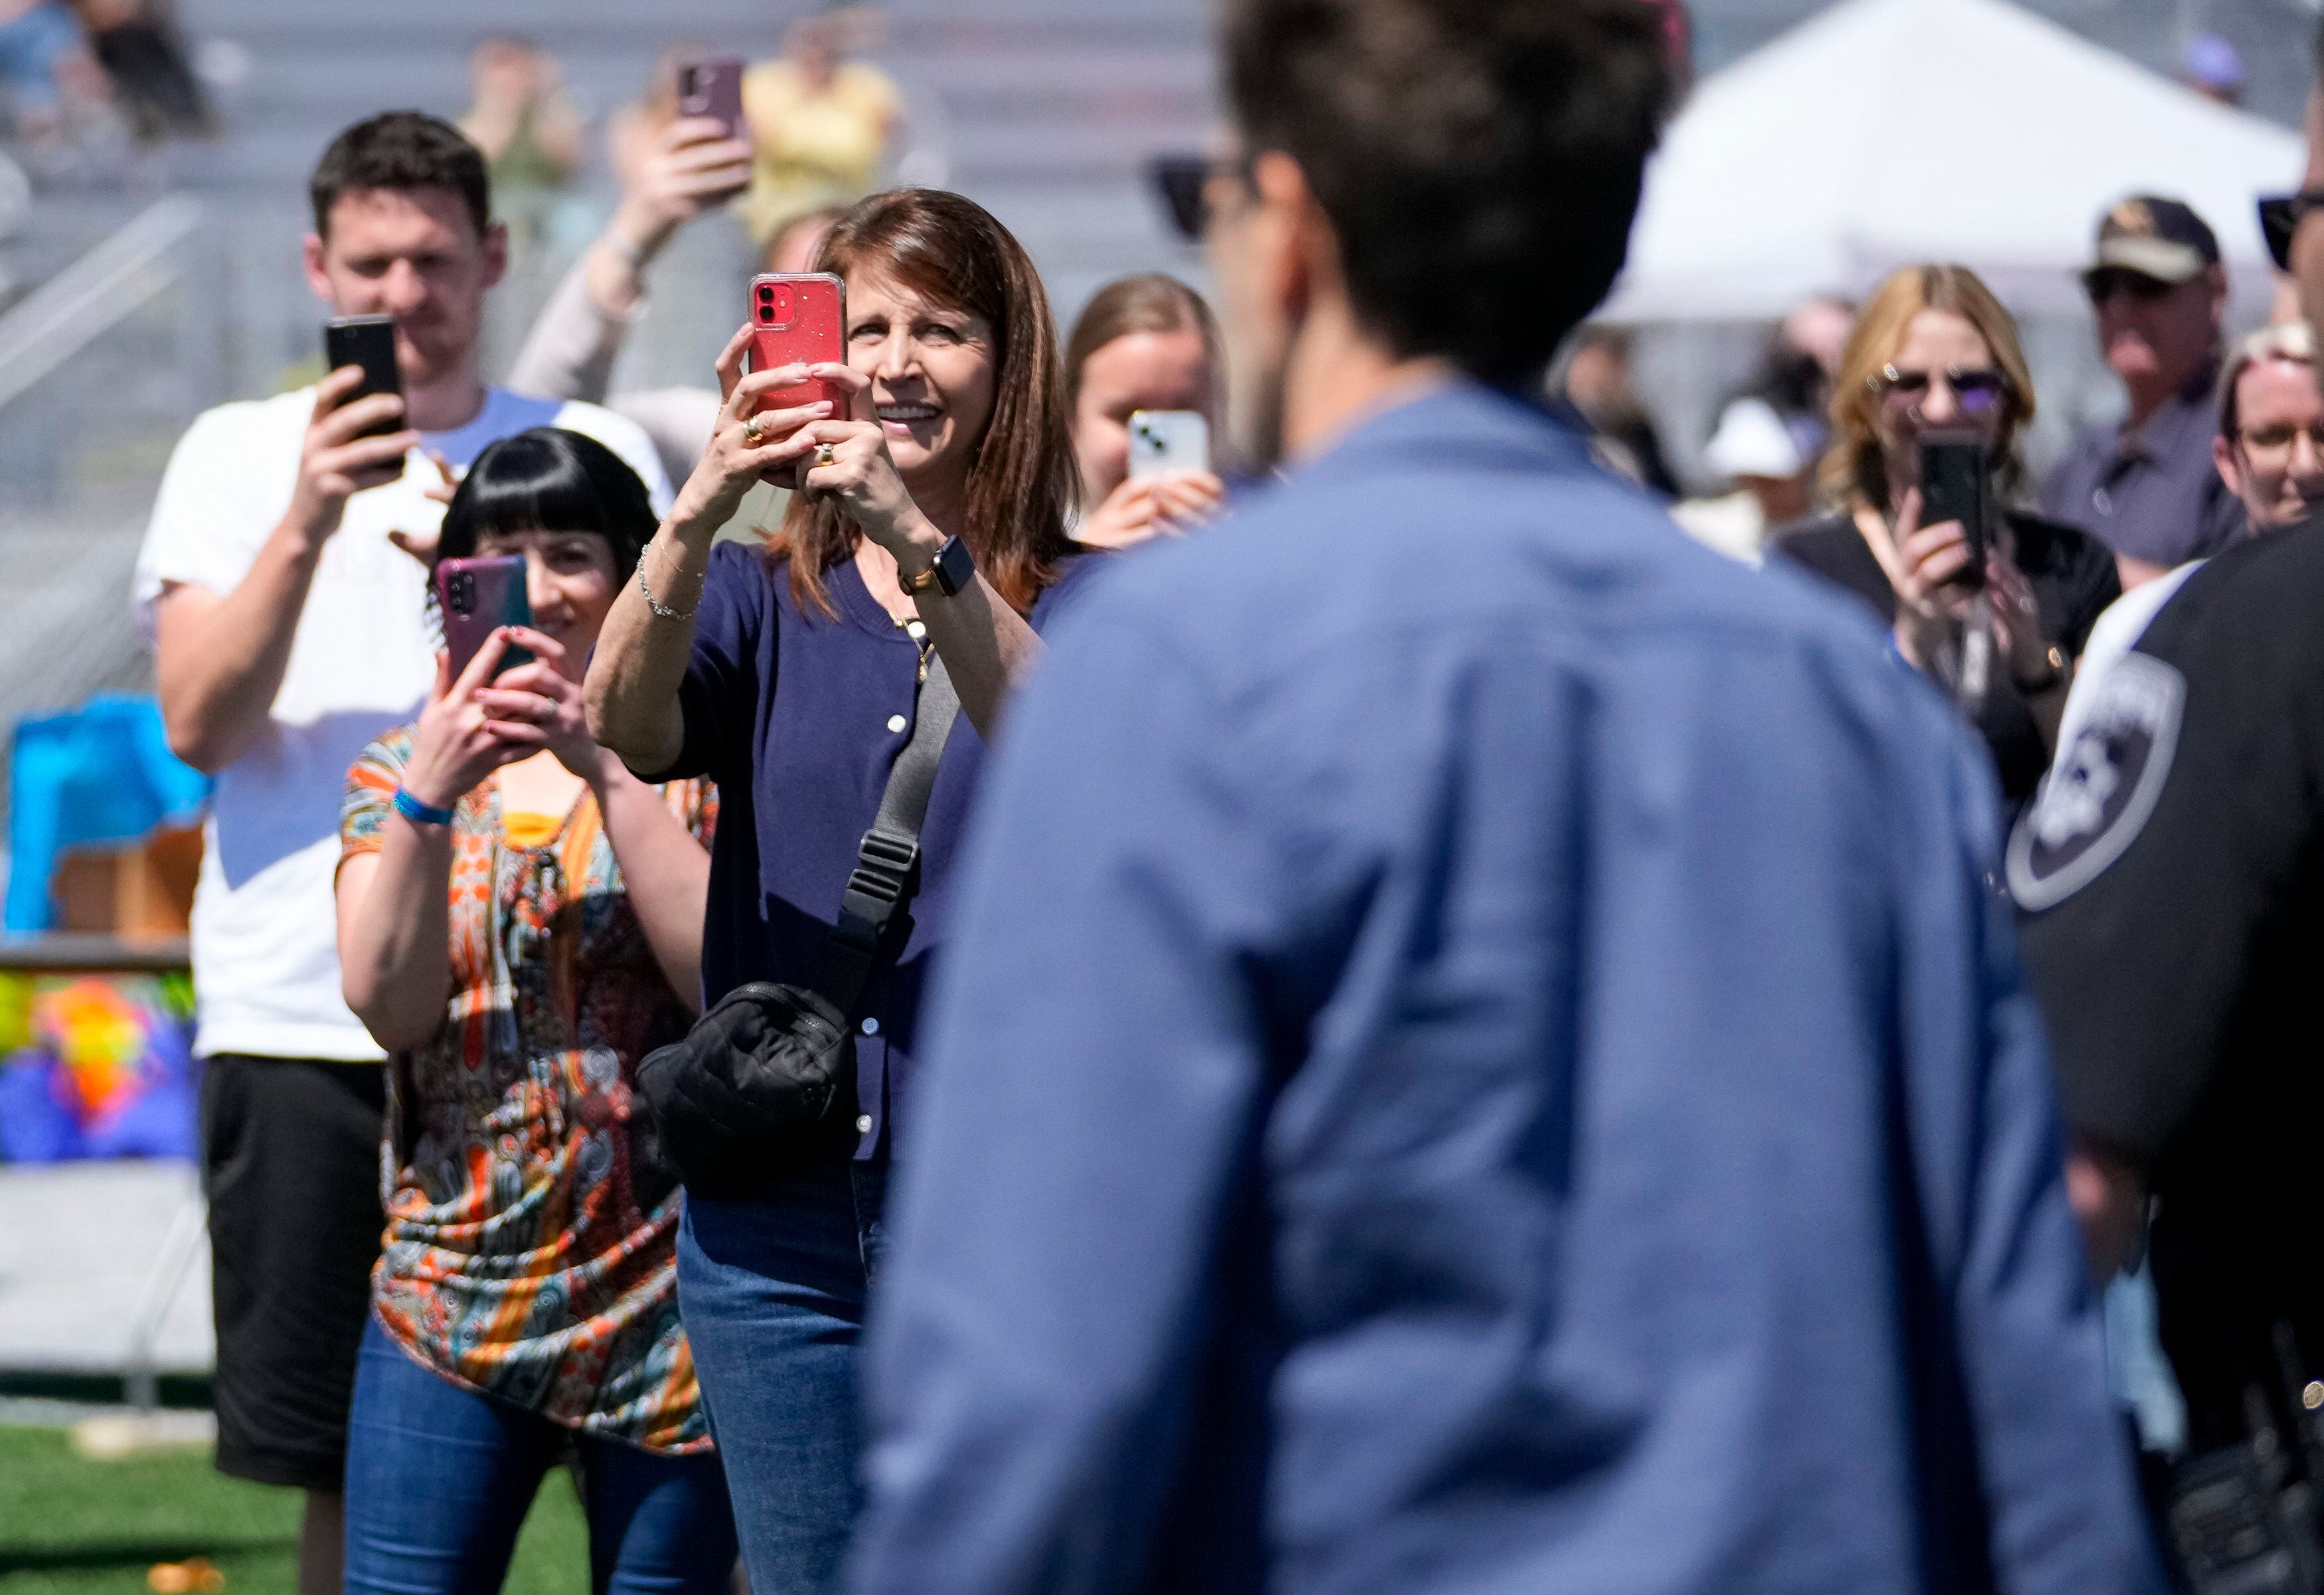 (Bethany Baker  |  The Salt Lake Tribune) People take photos of Kevin Bacon during a charity event to commemorate the 40th anniversary of the movie "Footloose" on the football field of Payson High School in Payson on Saturday, April 20, 2024.